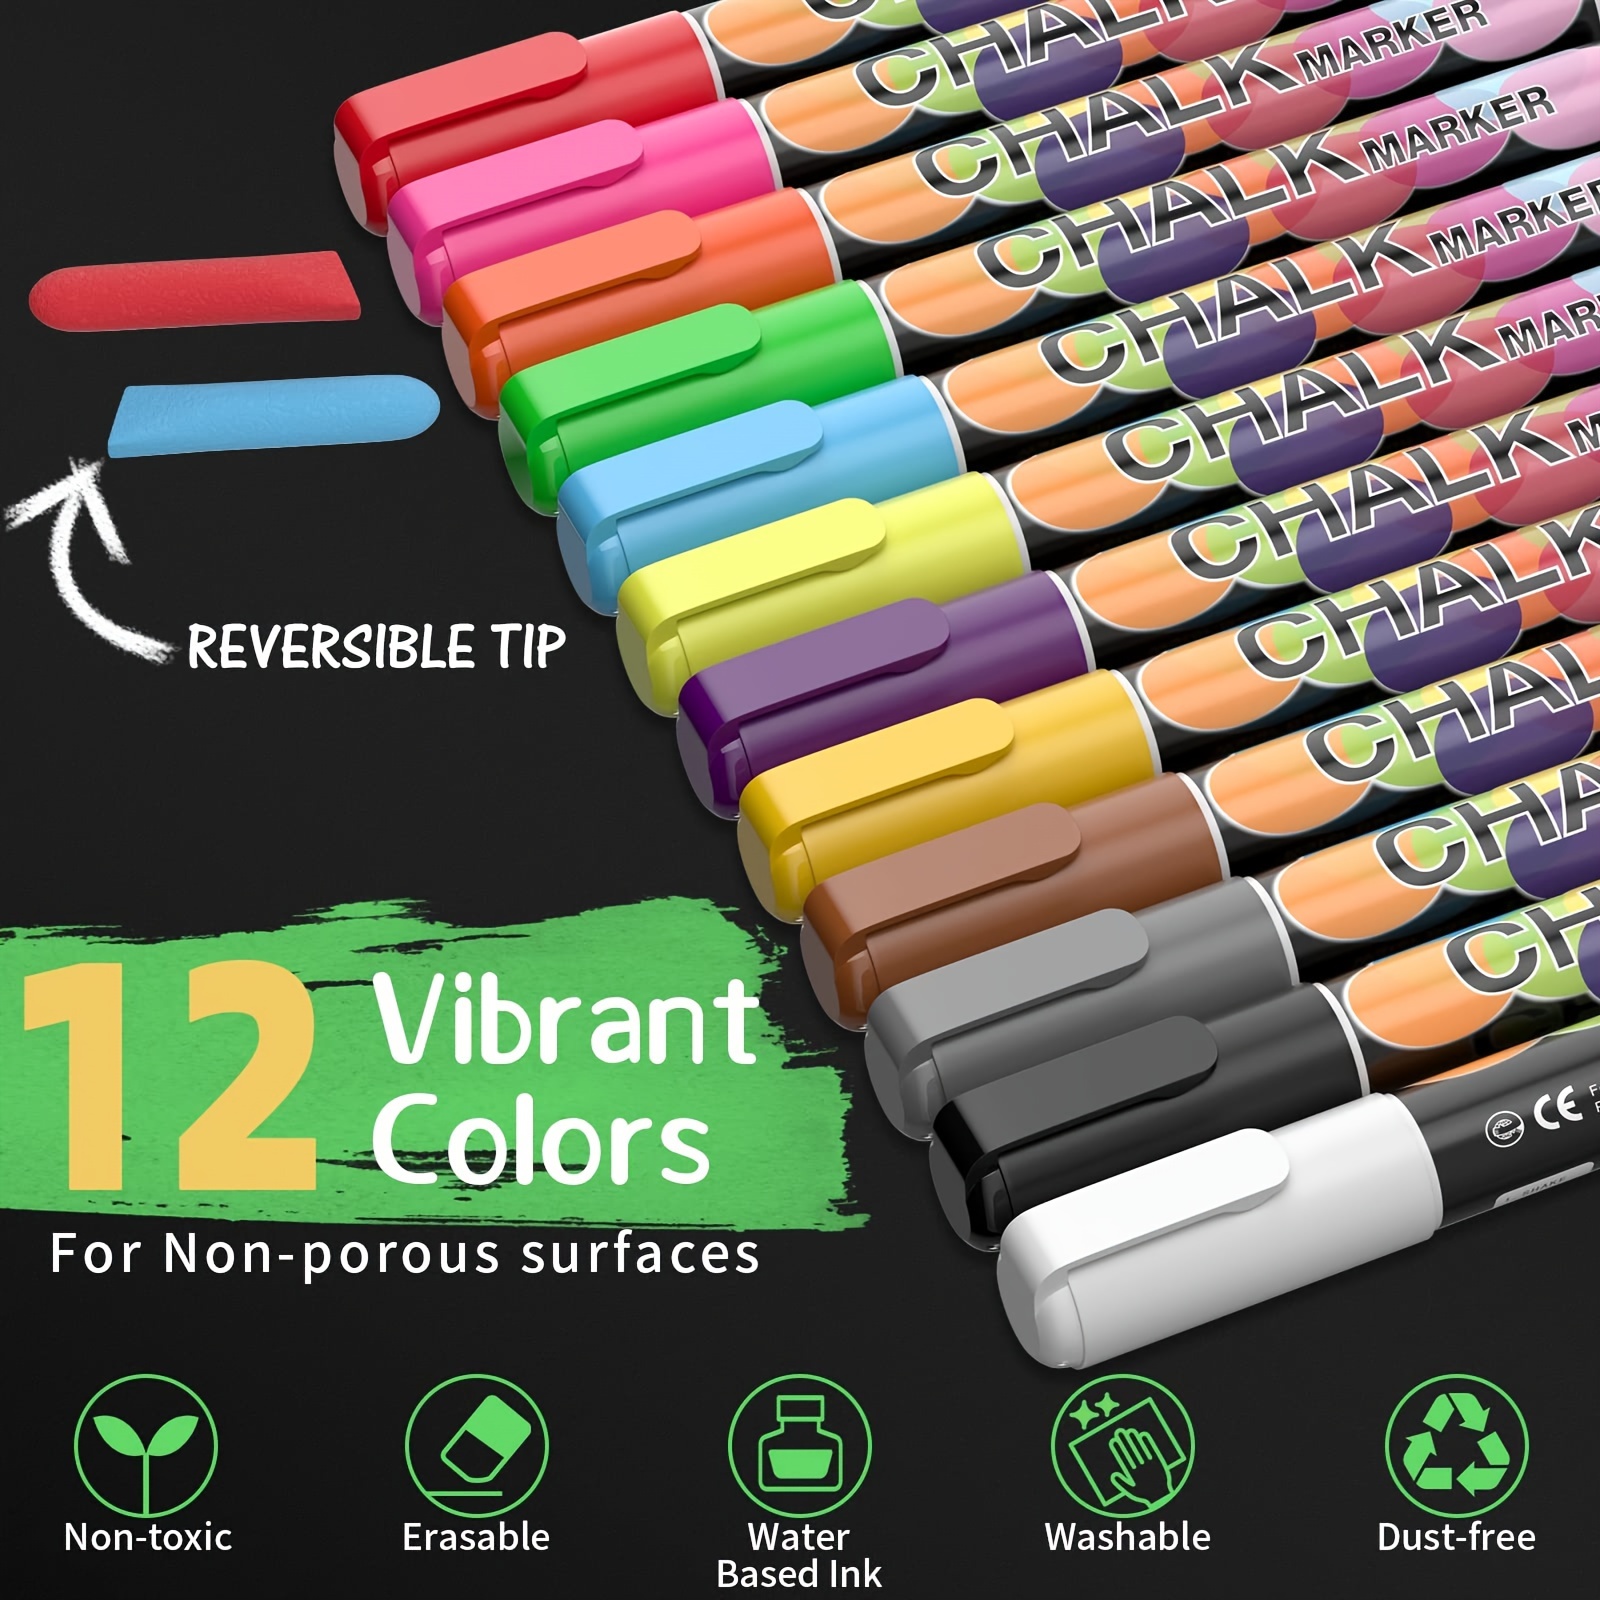 Liquid Chalk Markers for Chalkboard: 10 Metallic Colors Erasable Chalk  Pens, Window Markers for Glass Washable, Chalk Board Marker for Blackboard